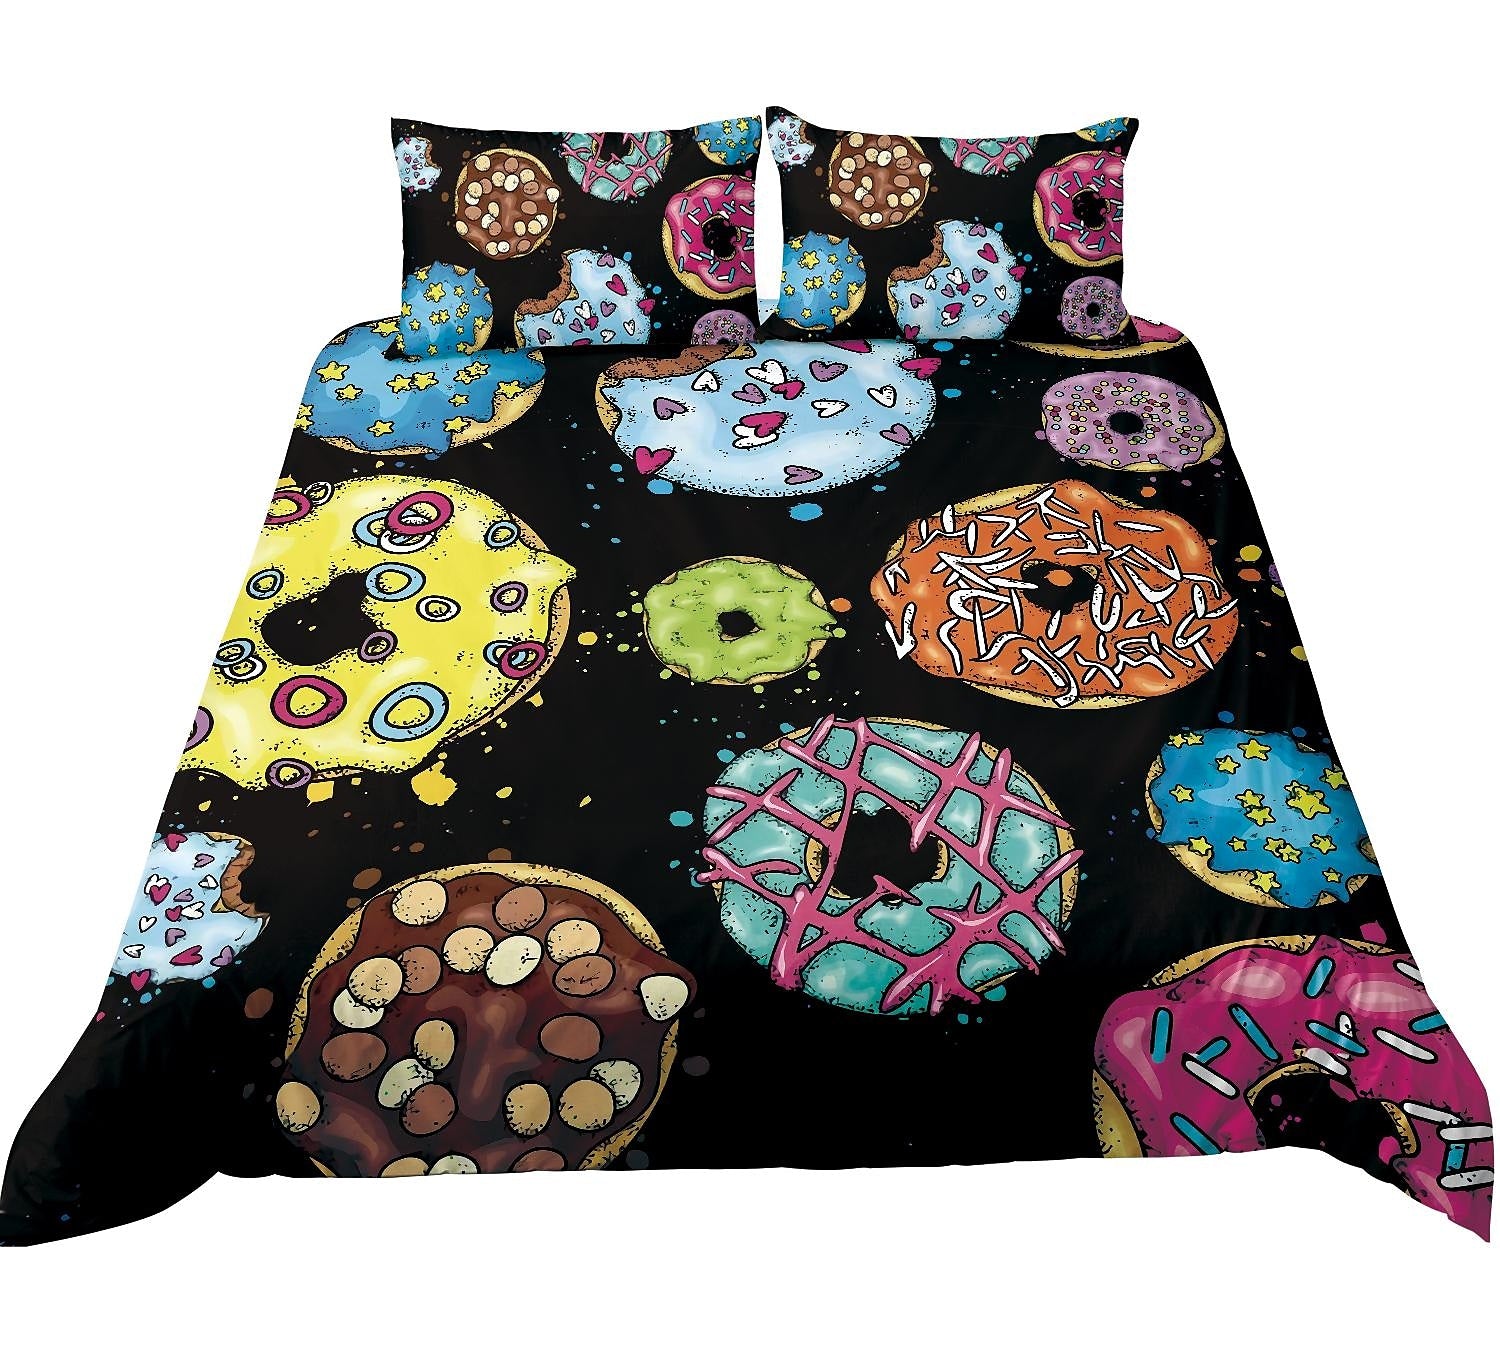 Colorful Donut Bedding Set Duvet Cover And 2 Pillowcases